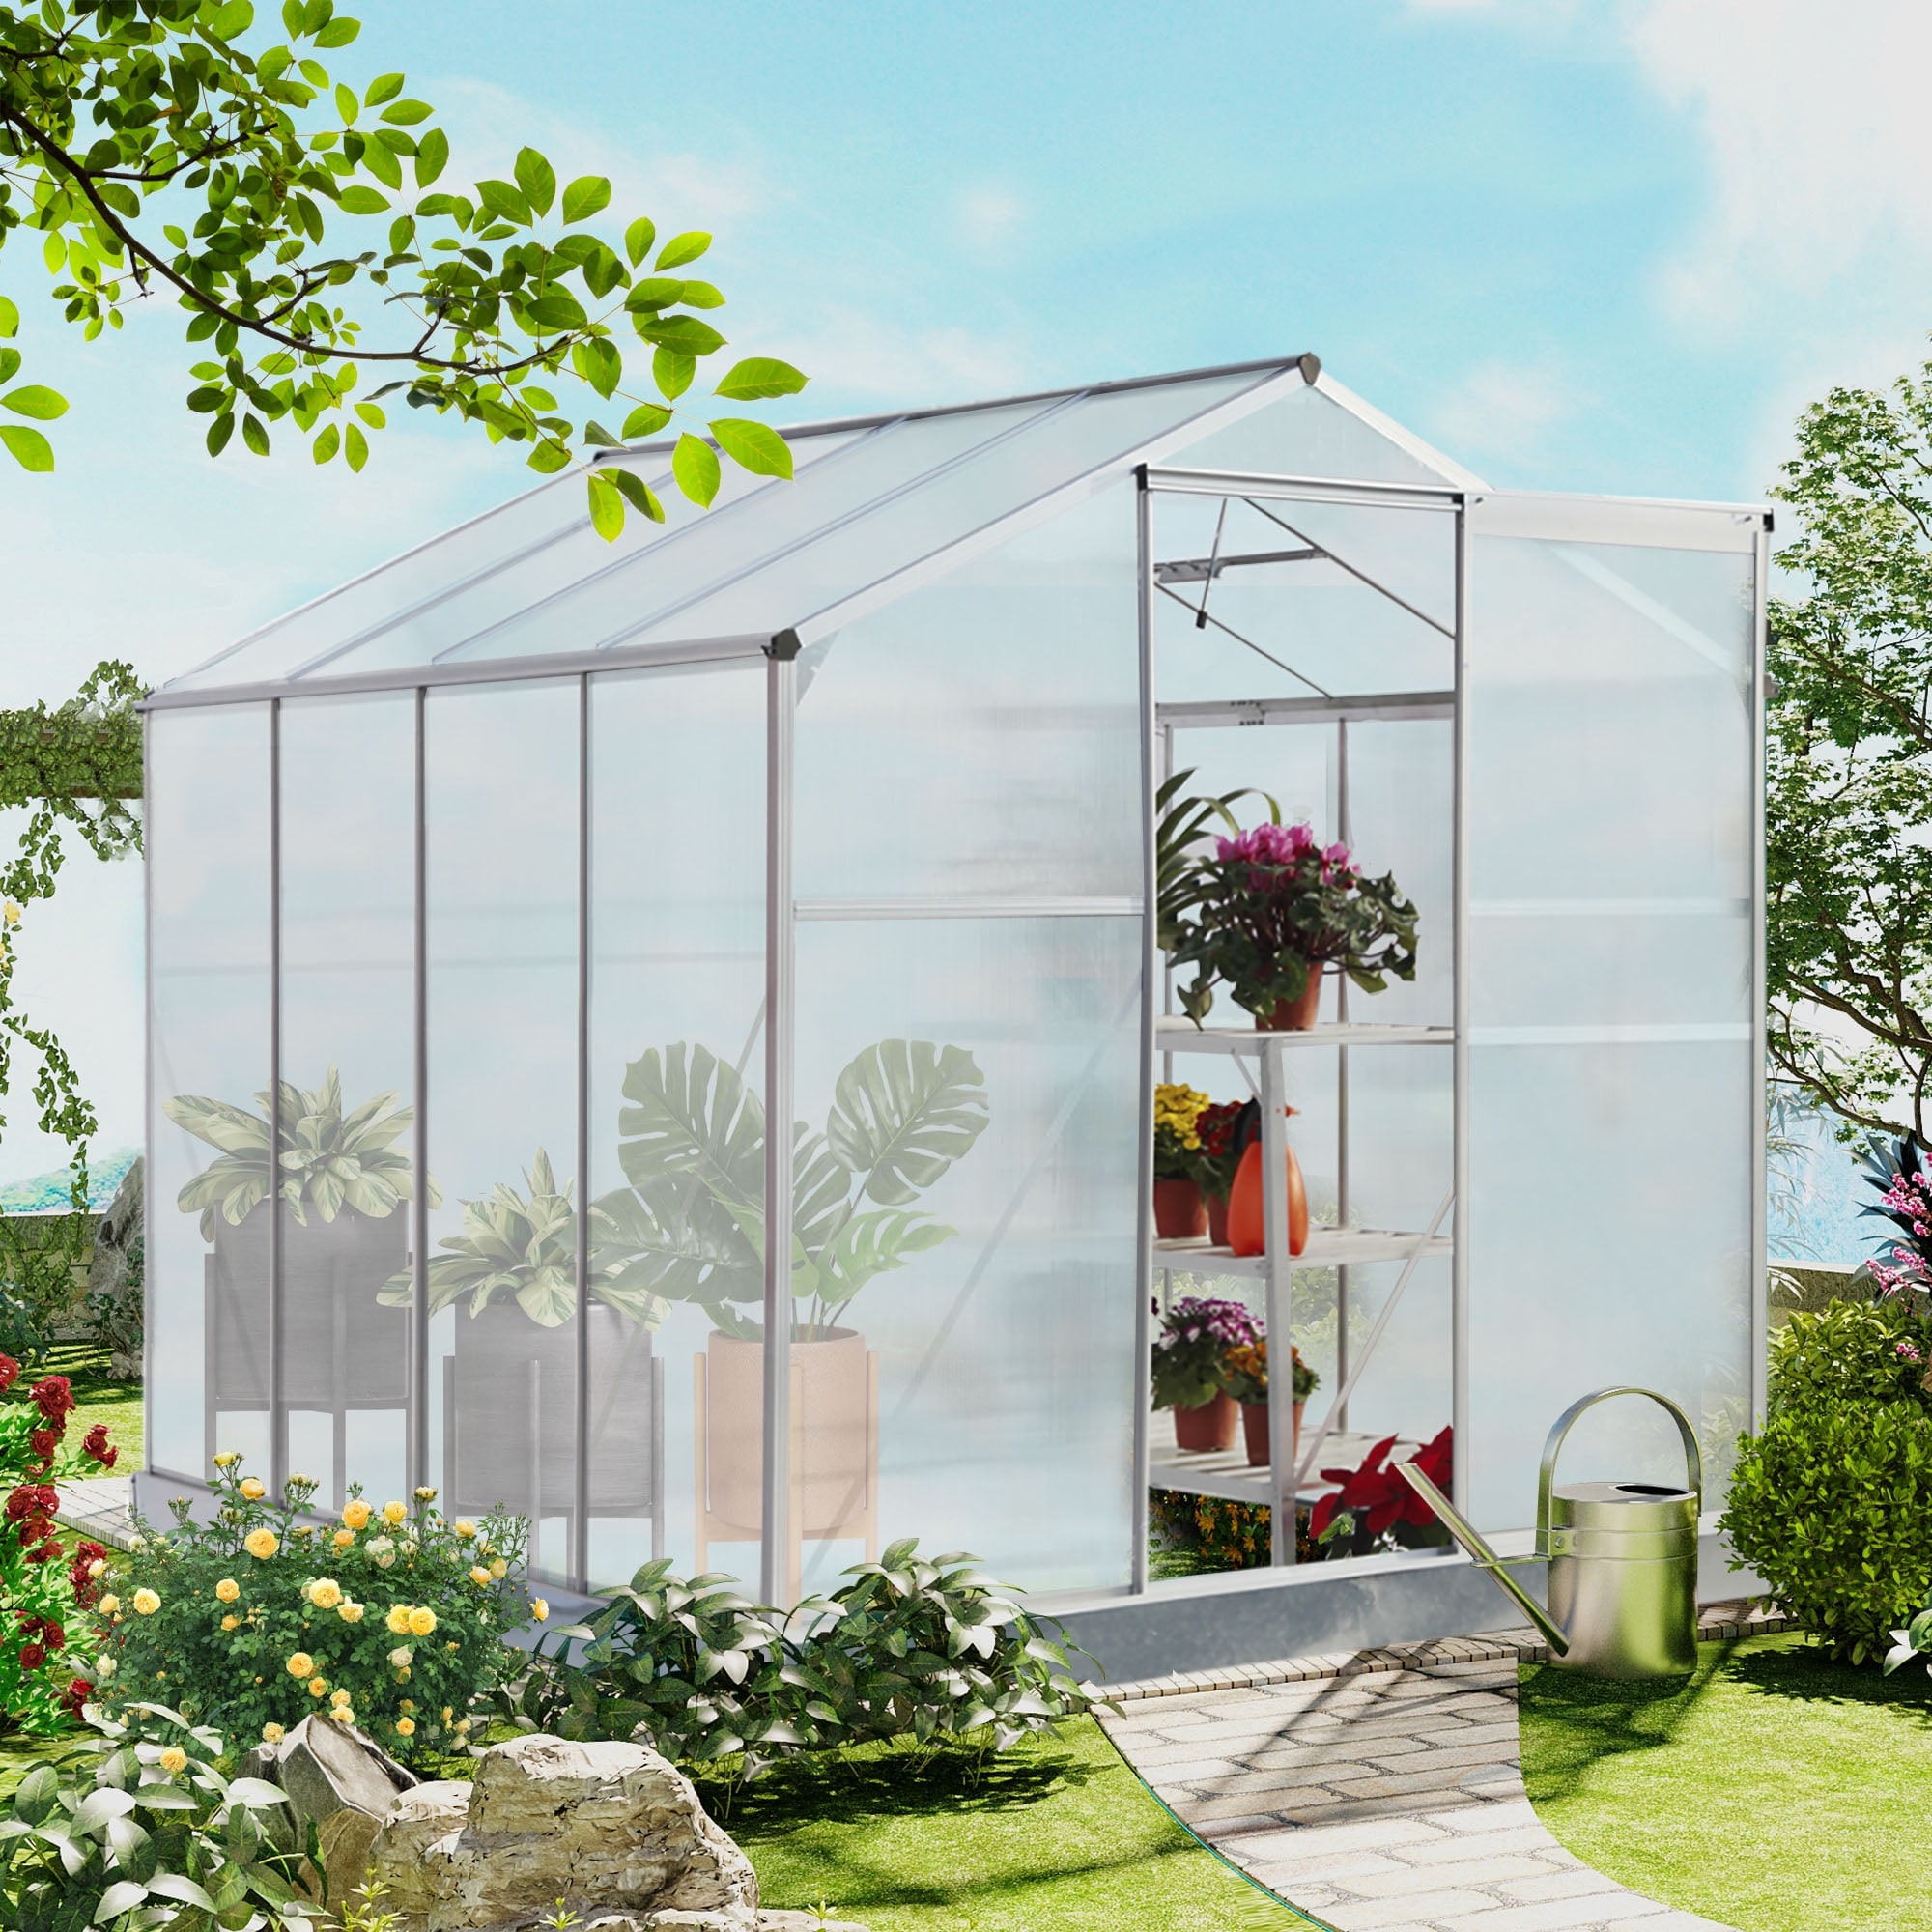 Details about   Rectangular Greenhouse Planter Box w/ Polycarbonate Panels to Keep Plants Warm 